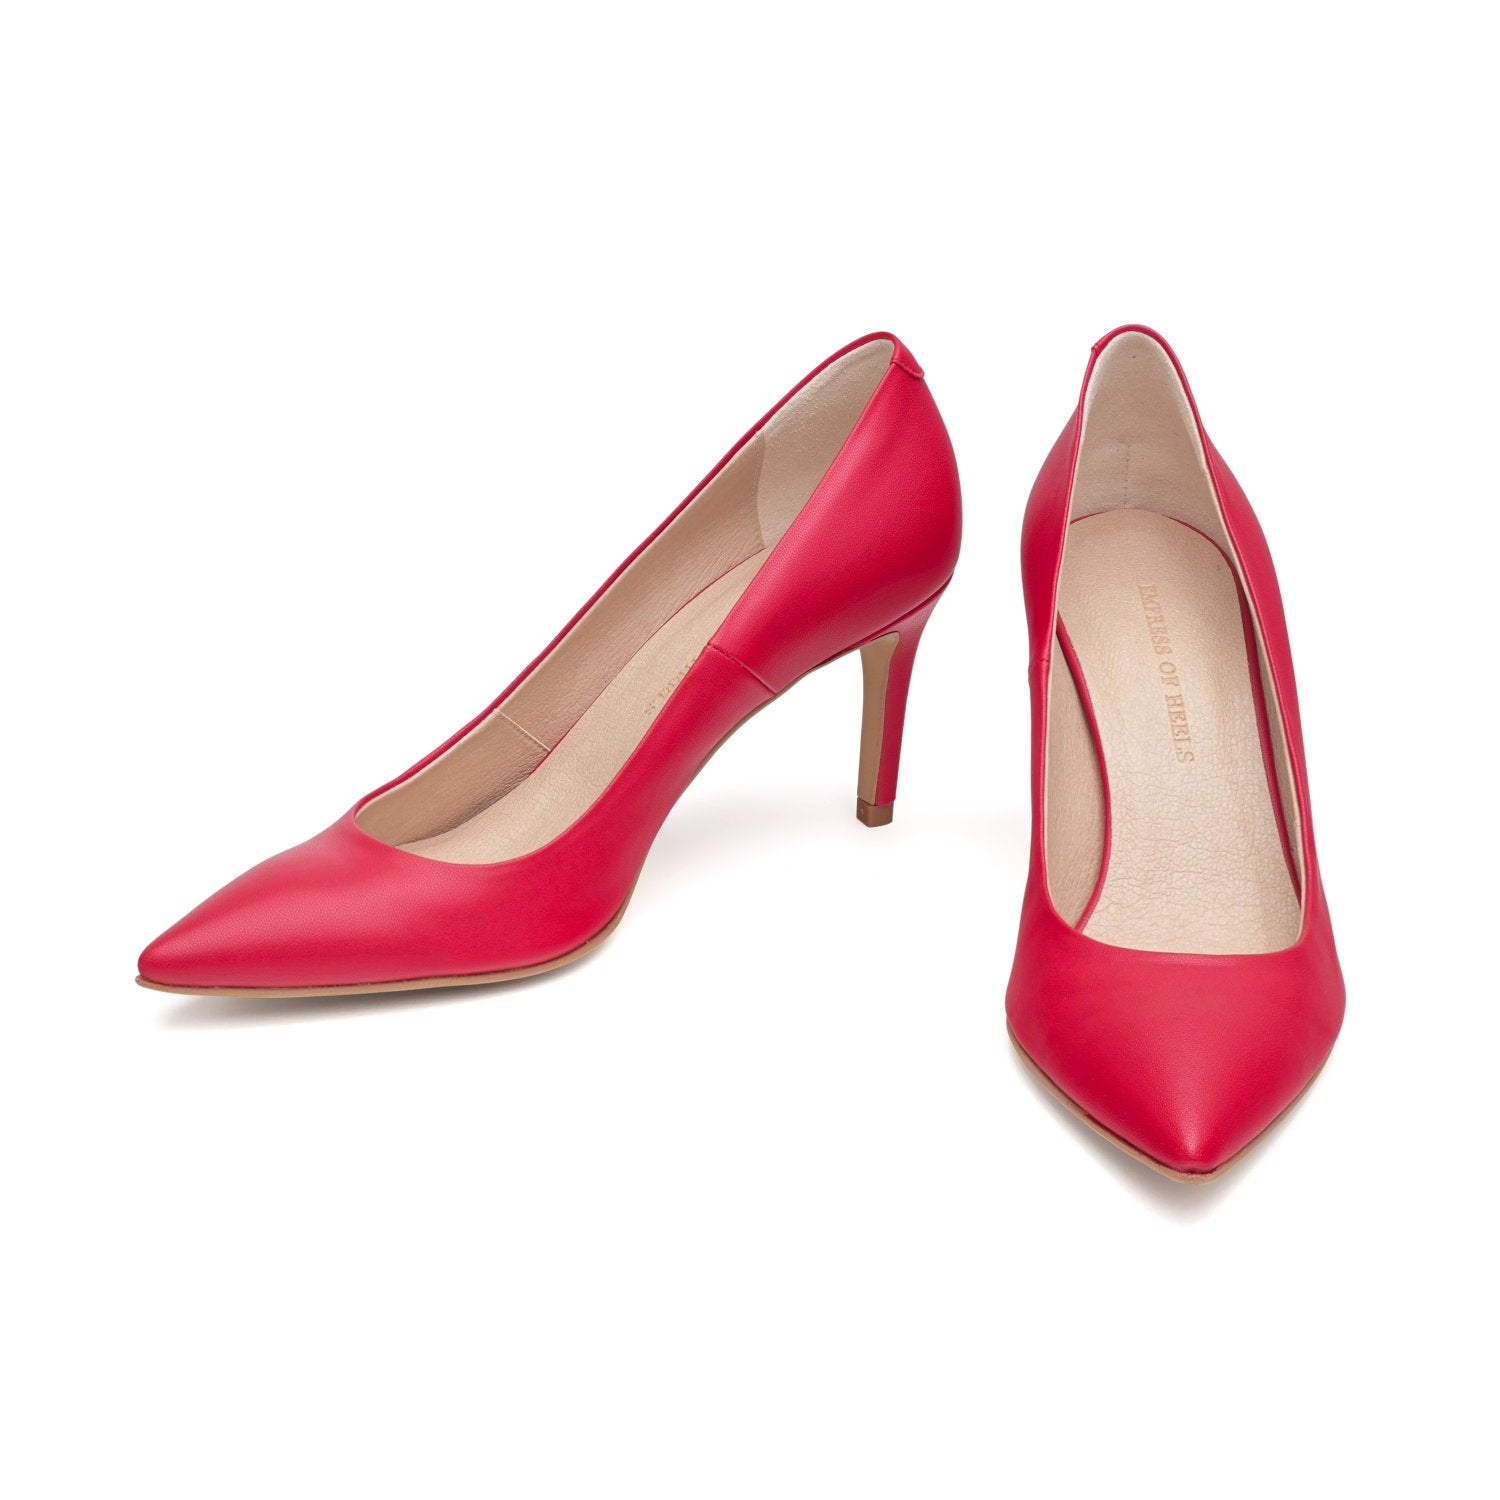 The Red – vegane 70mm Pumps